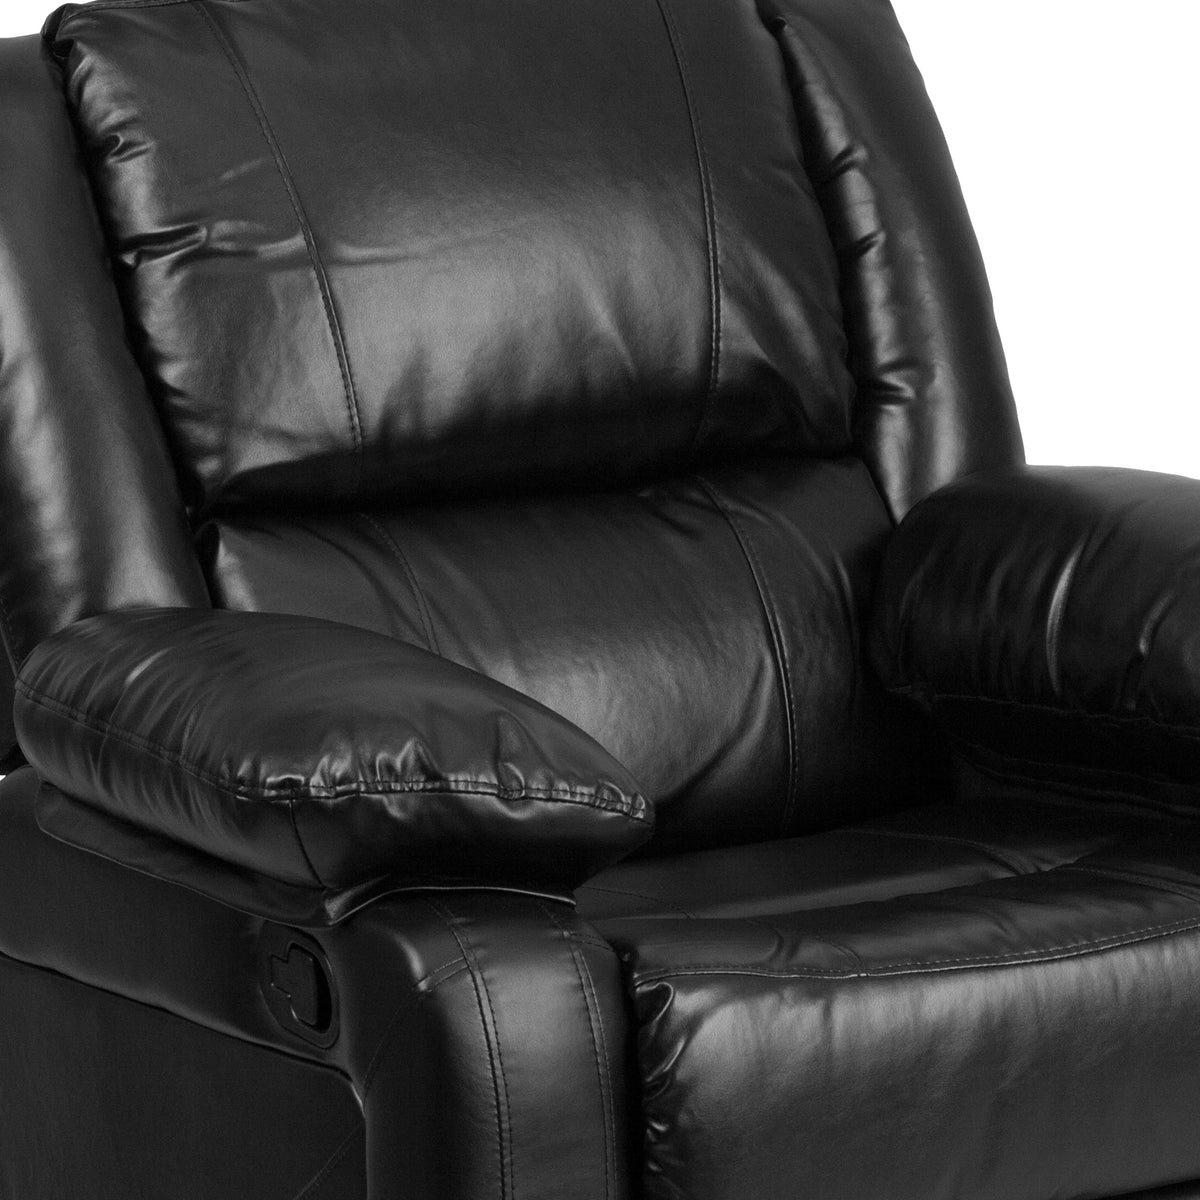 Black LeatherSoft |#| Contemporary Black LeatherSoft Pillow Back Recliner - Living Room Furniture